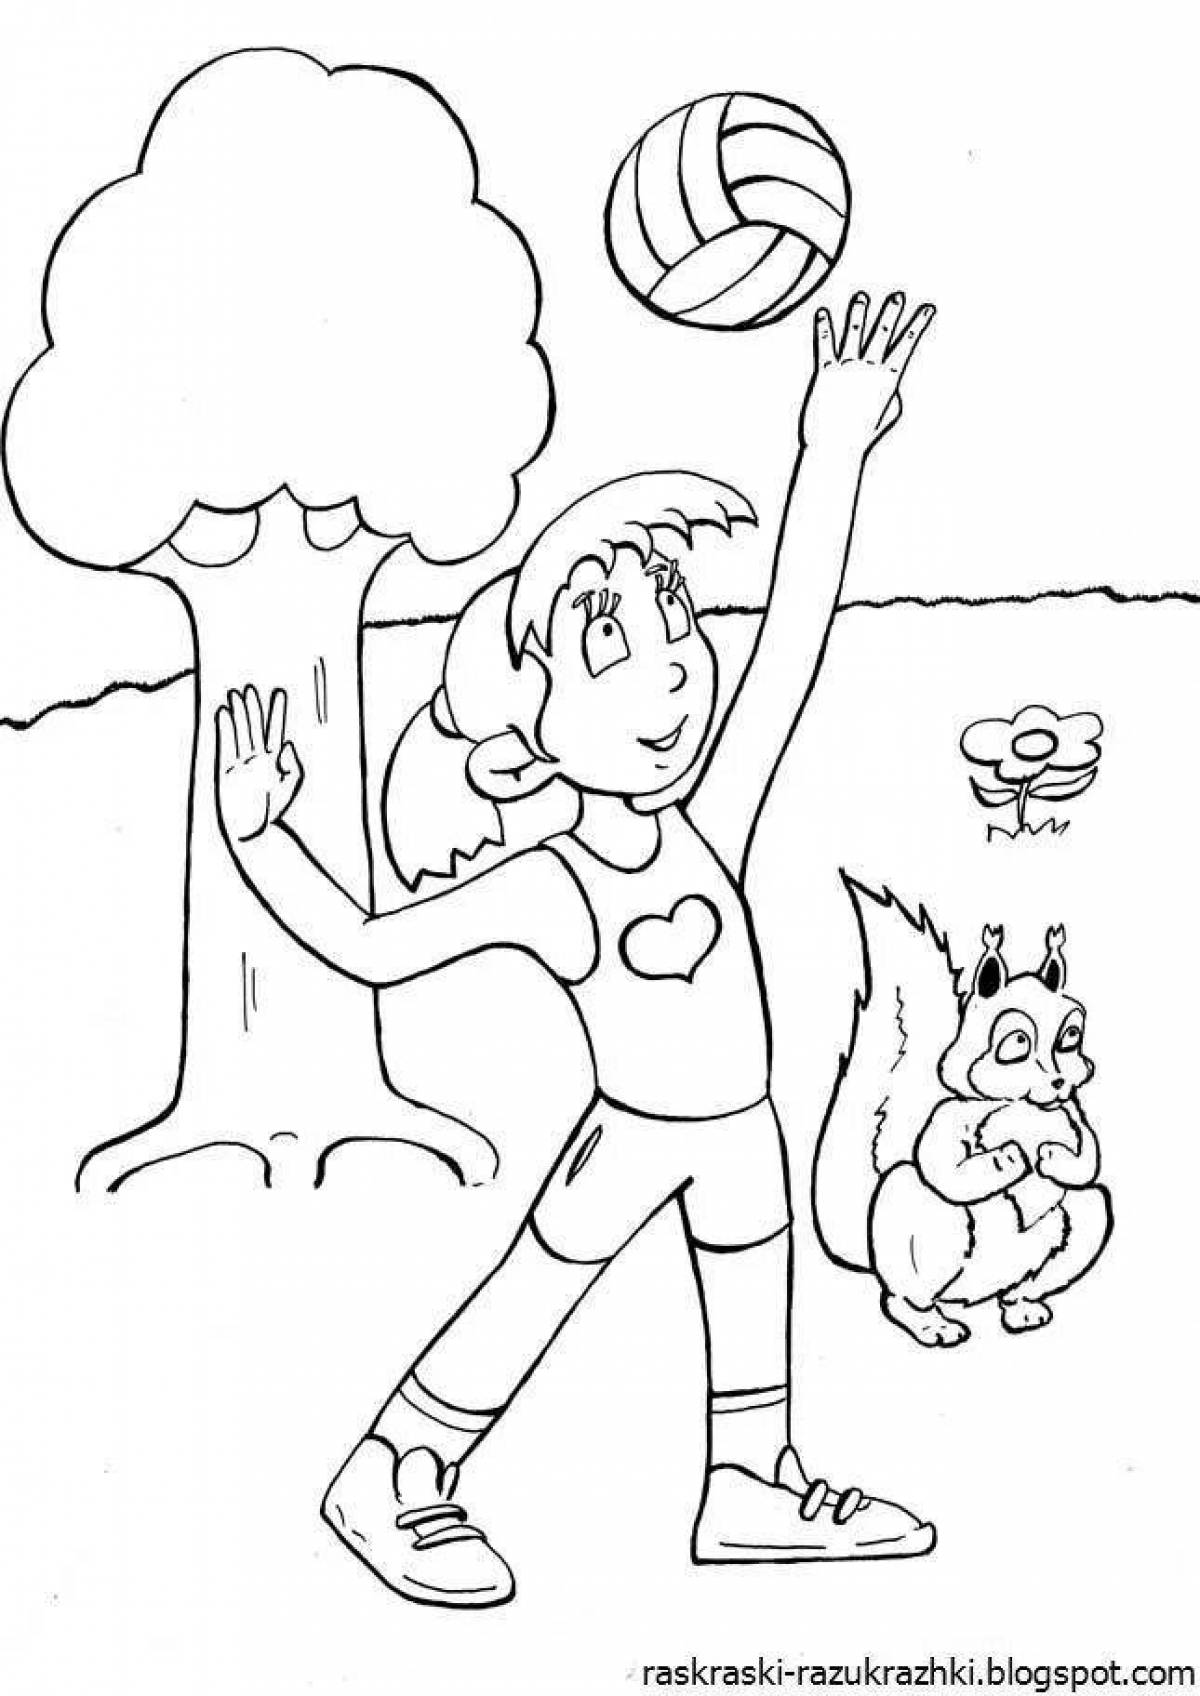 A fascinating coloring book about a healthy lifestyle